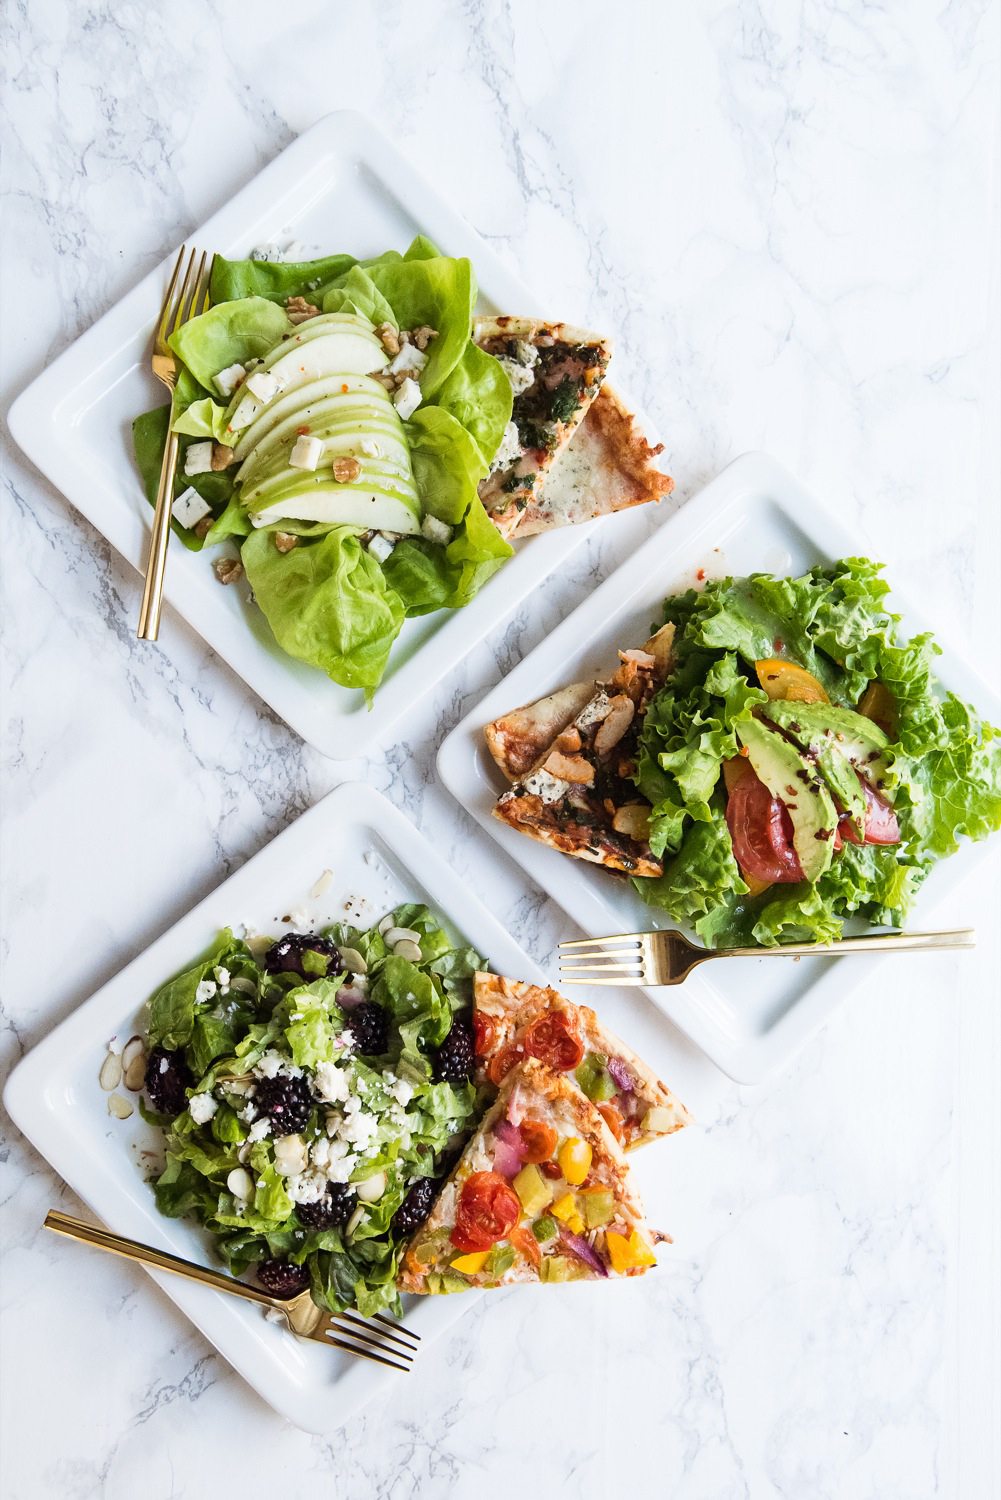 Easy Weeknight Dinner Ideas | Pizza and salad pairings from @cydconverse plus more recipes, entertaining tips, party ideas and more!